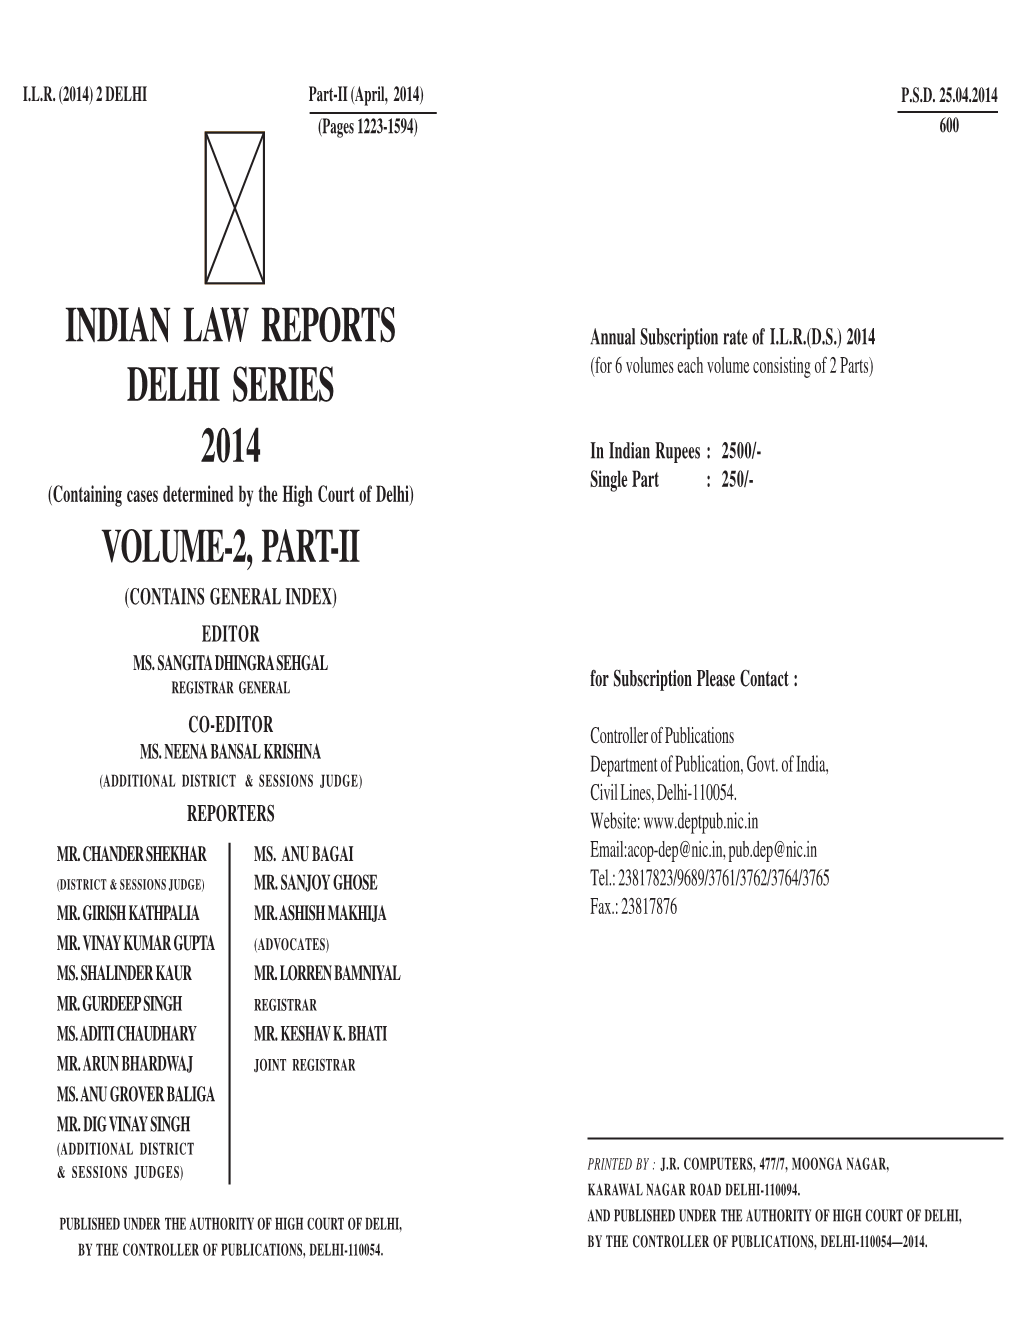 INDIAN LAW REPORTS DELHI SERIES 2014 (Containing Cases Determined by the High Court of Delhi) VOLUME-2, PART-II (CONTAINS GENERAL INDEX) INDIAN LAW REPORTS EDITOR MS